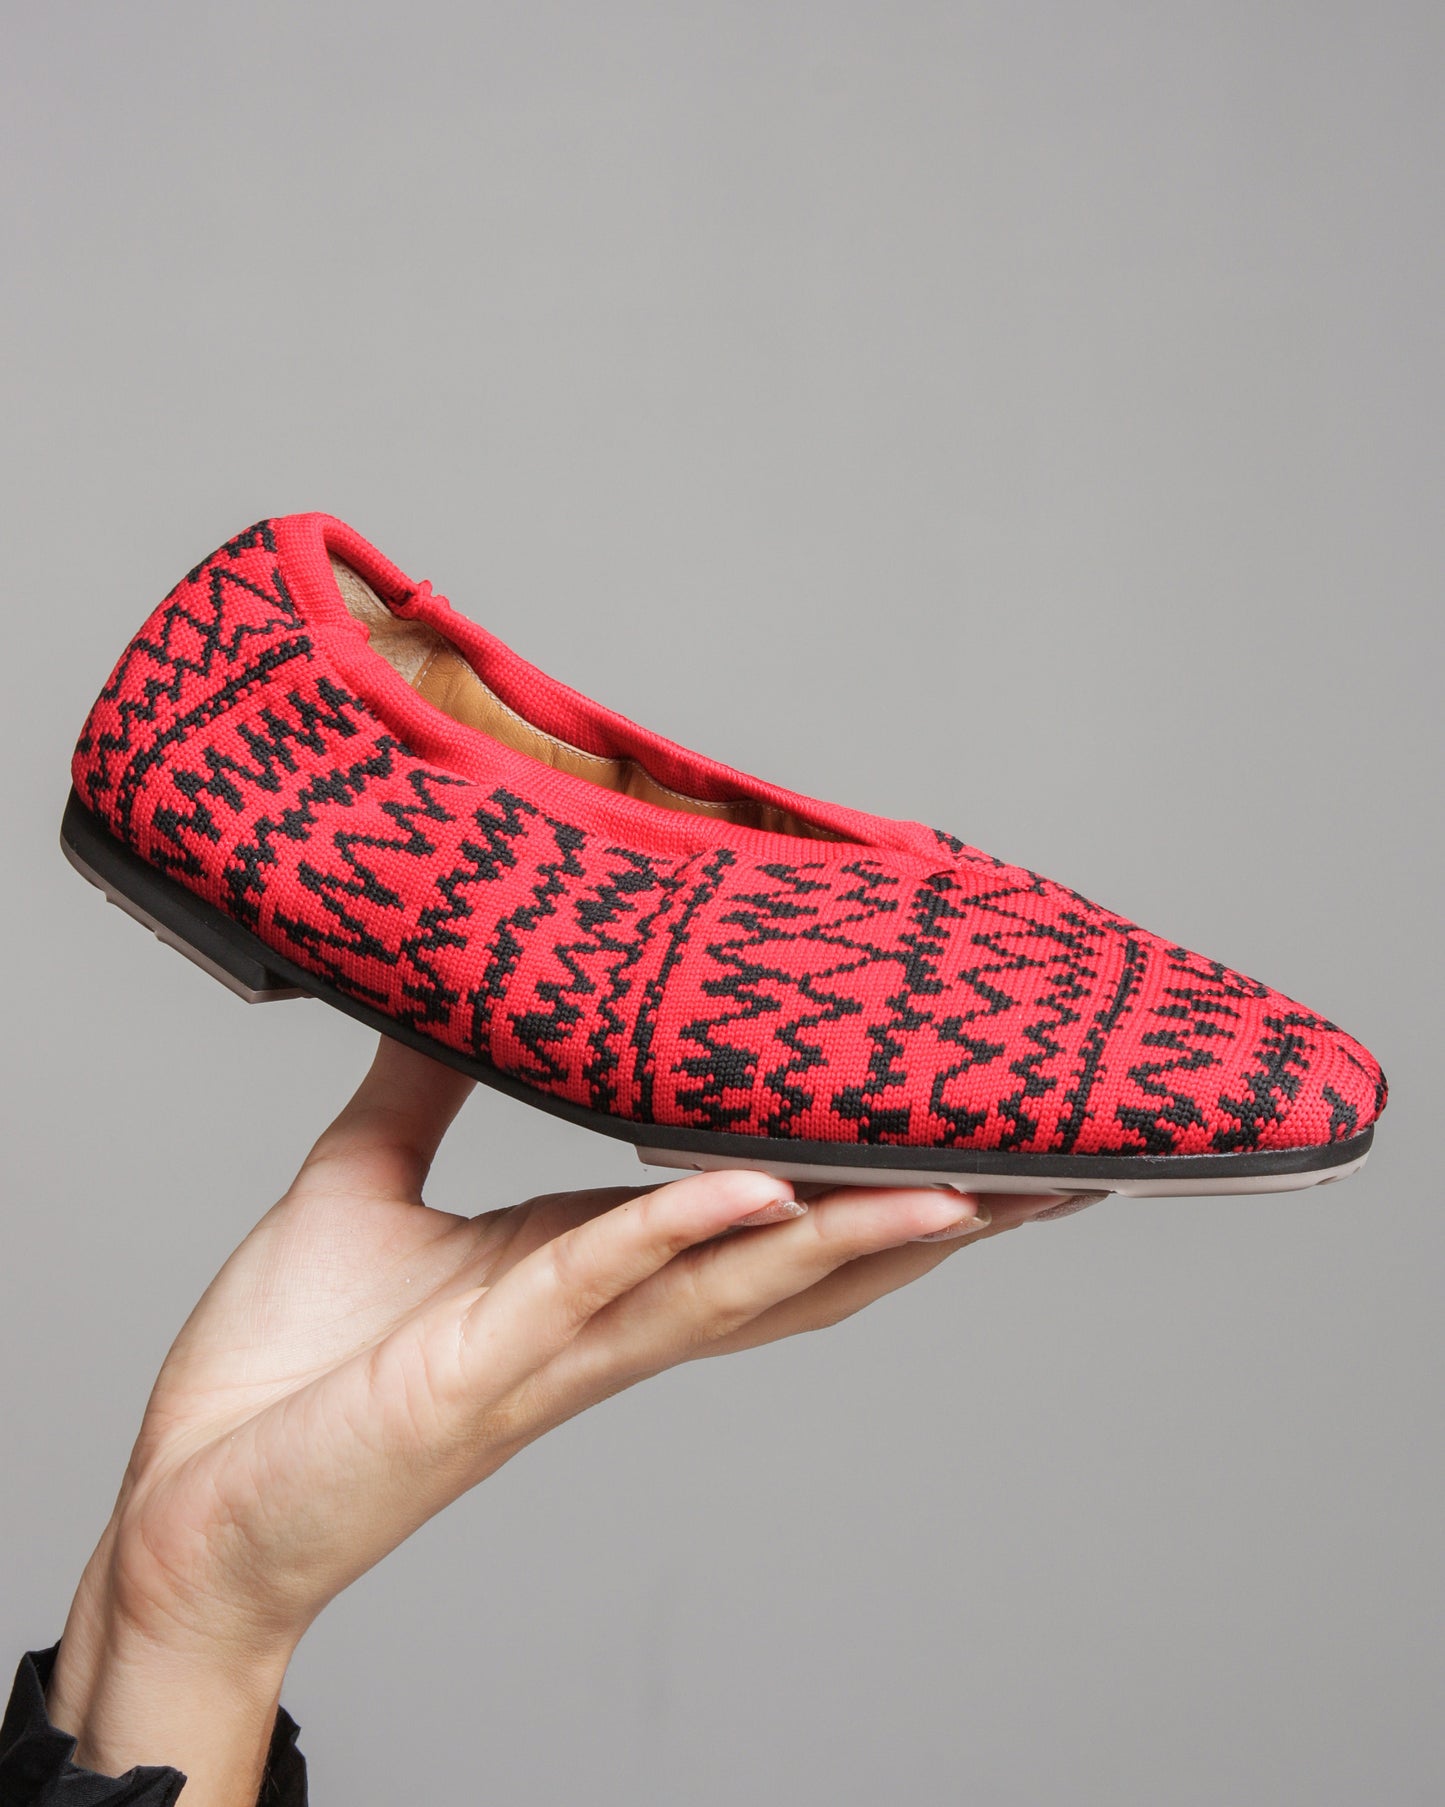 Jacquard Knit Shoes Red